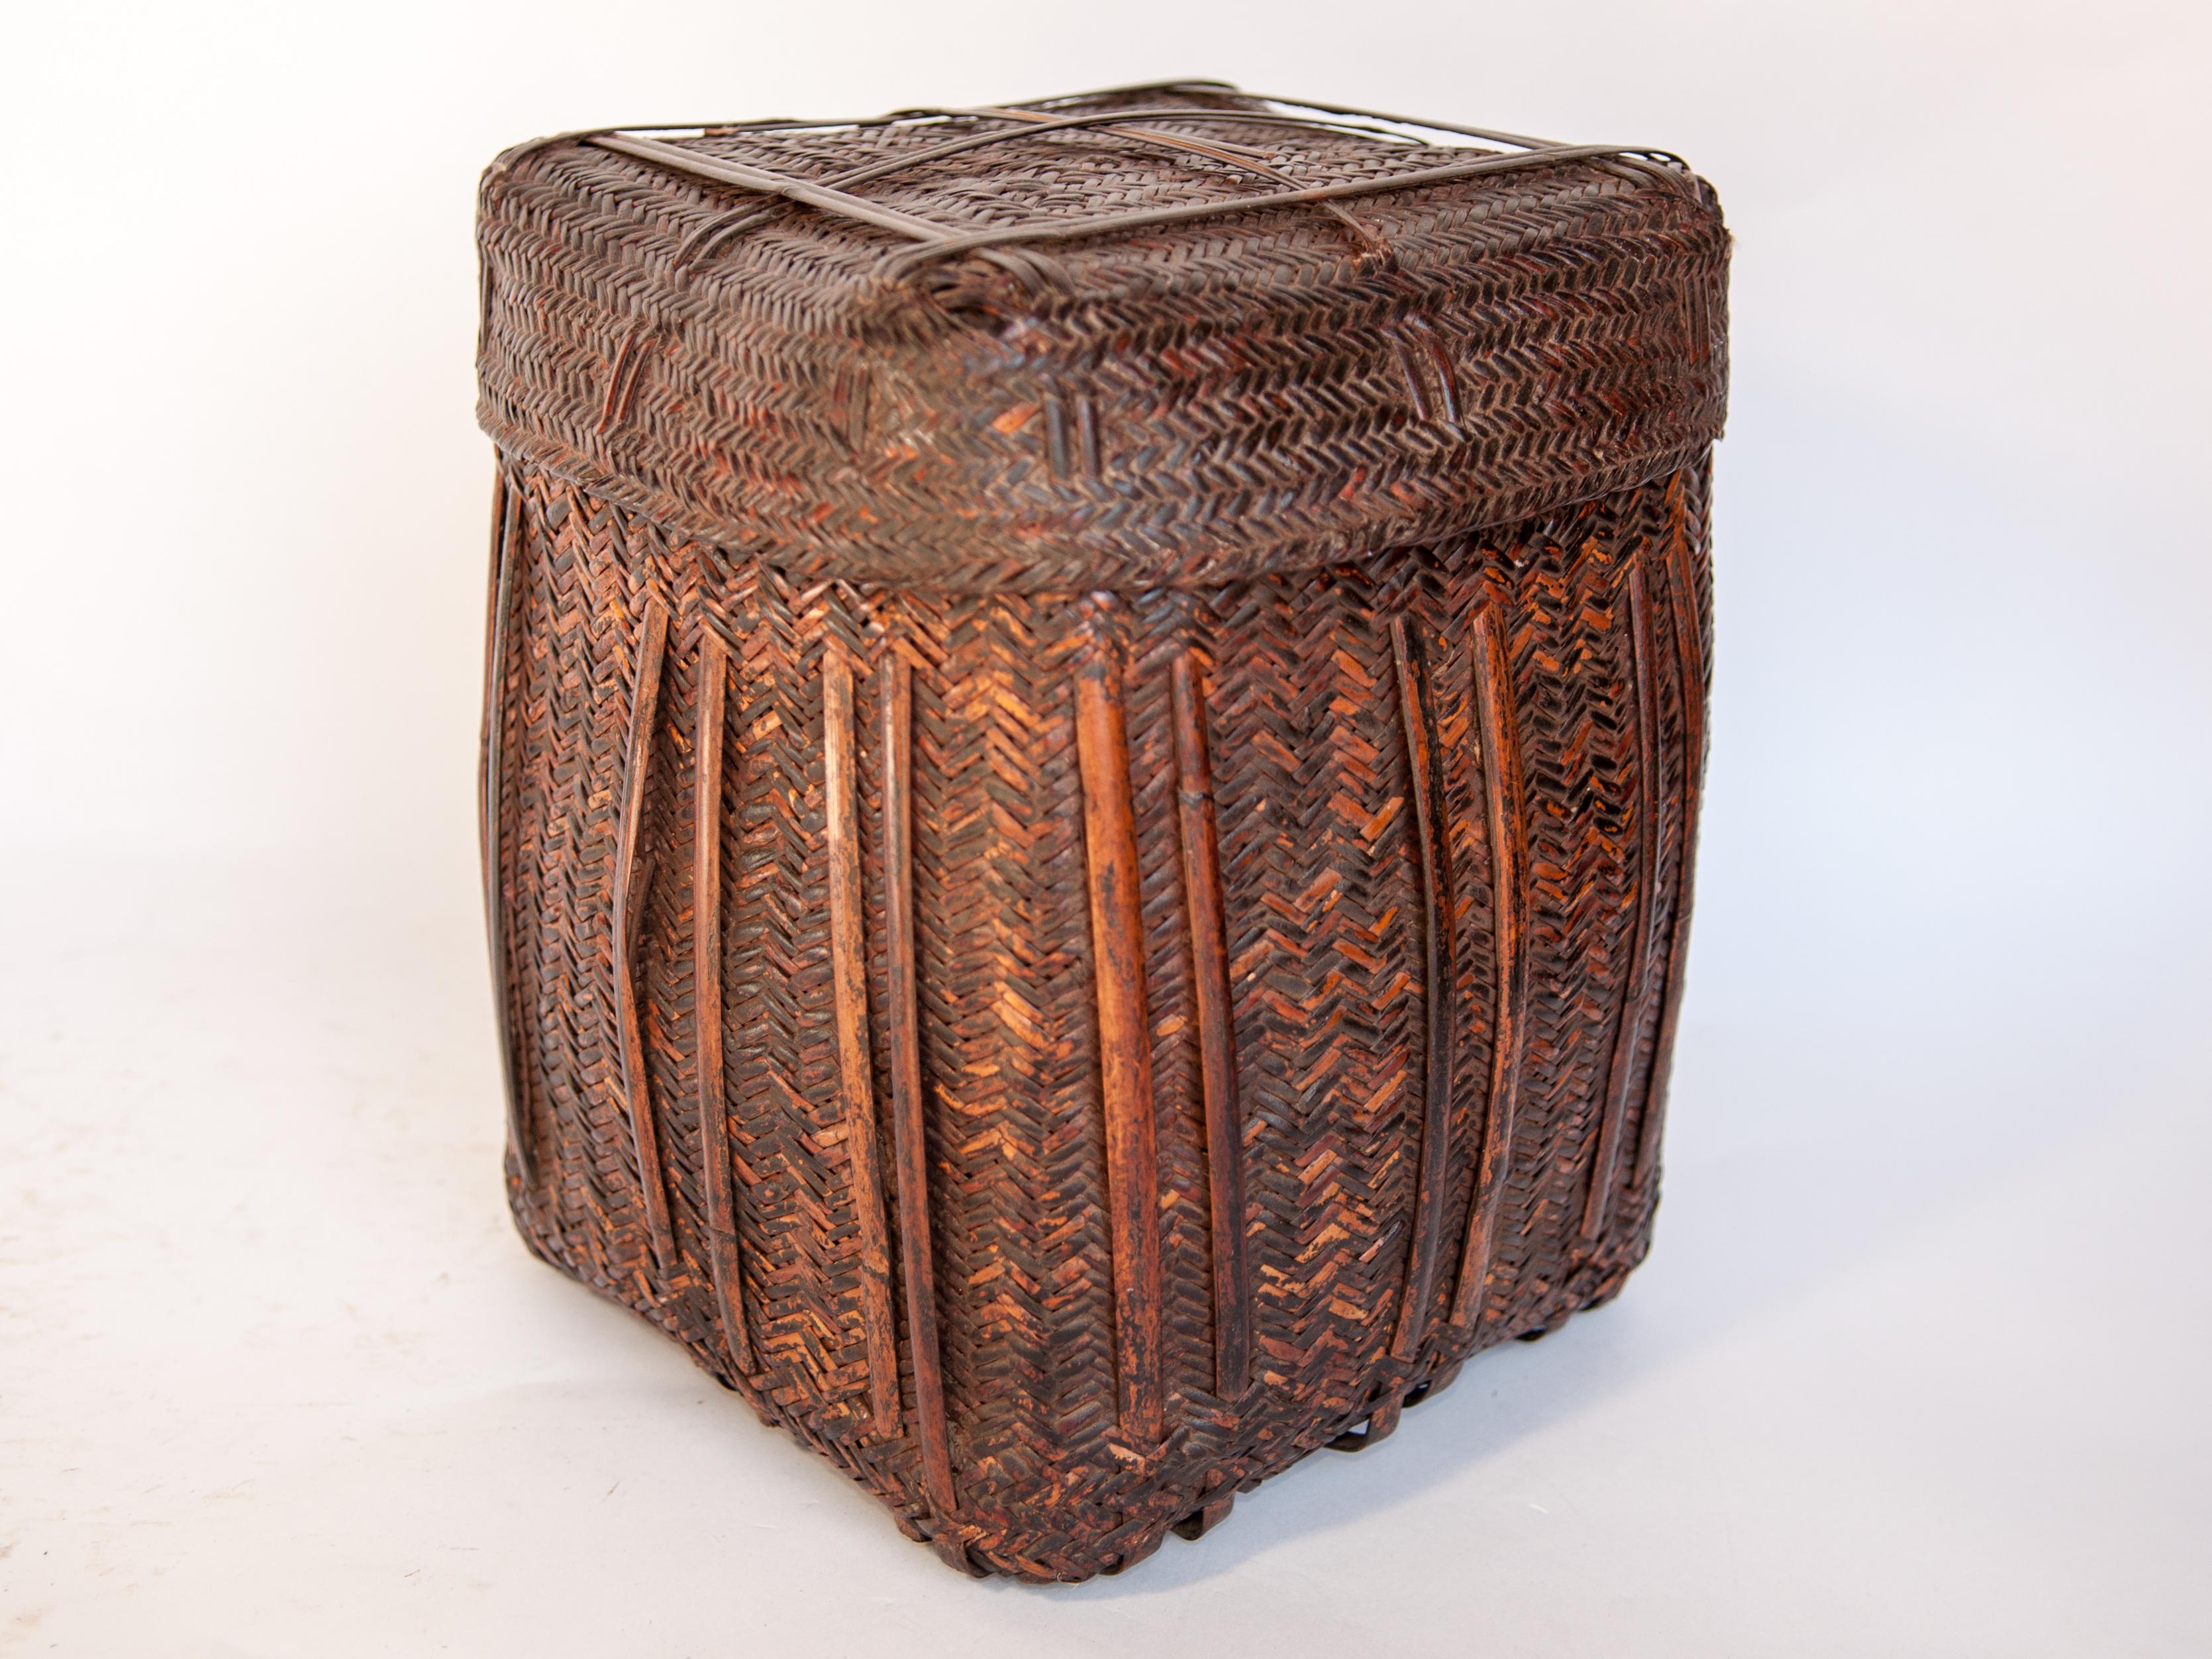 Rustic tribal storage basket with lid from the Tamang of Nepal, mid-20th century.
This rugged bamboo basket comes from the Himalayan Foothills of Nepal; and mirrors the raw beauty of the environment it inhabits and the hardiness of the people who